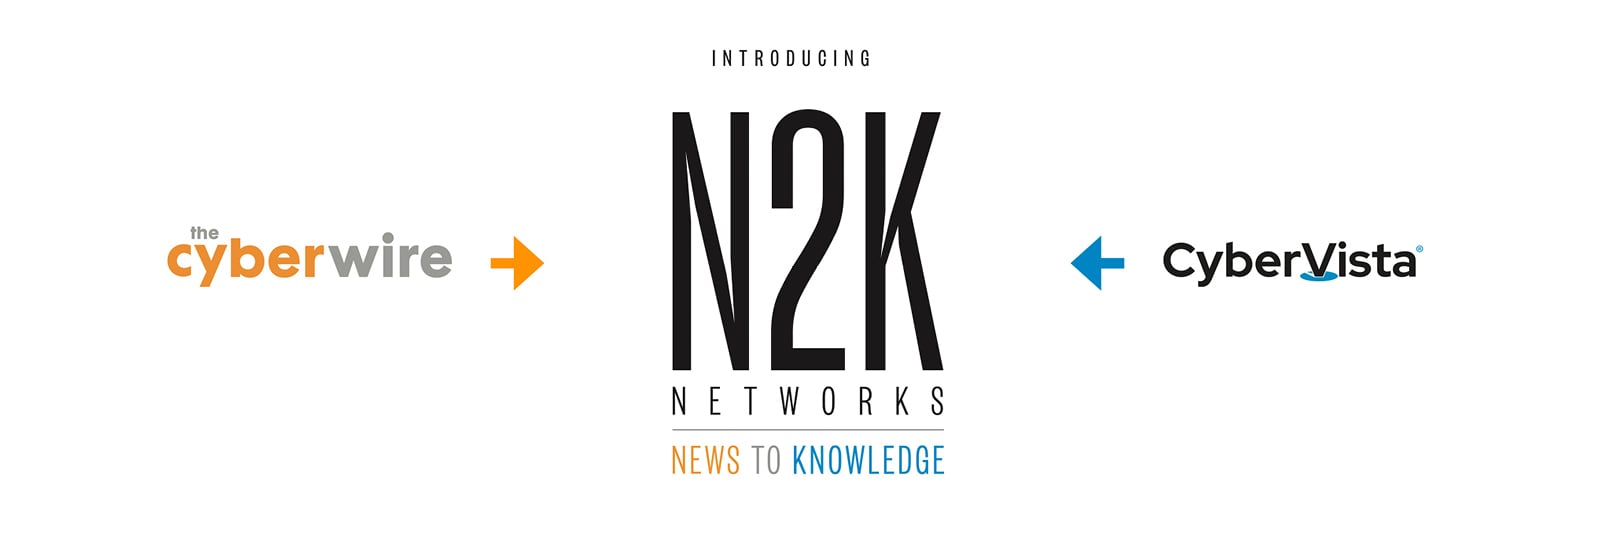 CyberWire logo with orange arrow pointing to Introducing N2K Networks News to Knowledge logo with blue arrow and CyberVista logo on right side